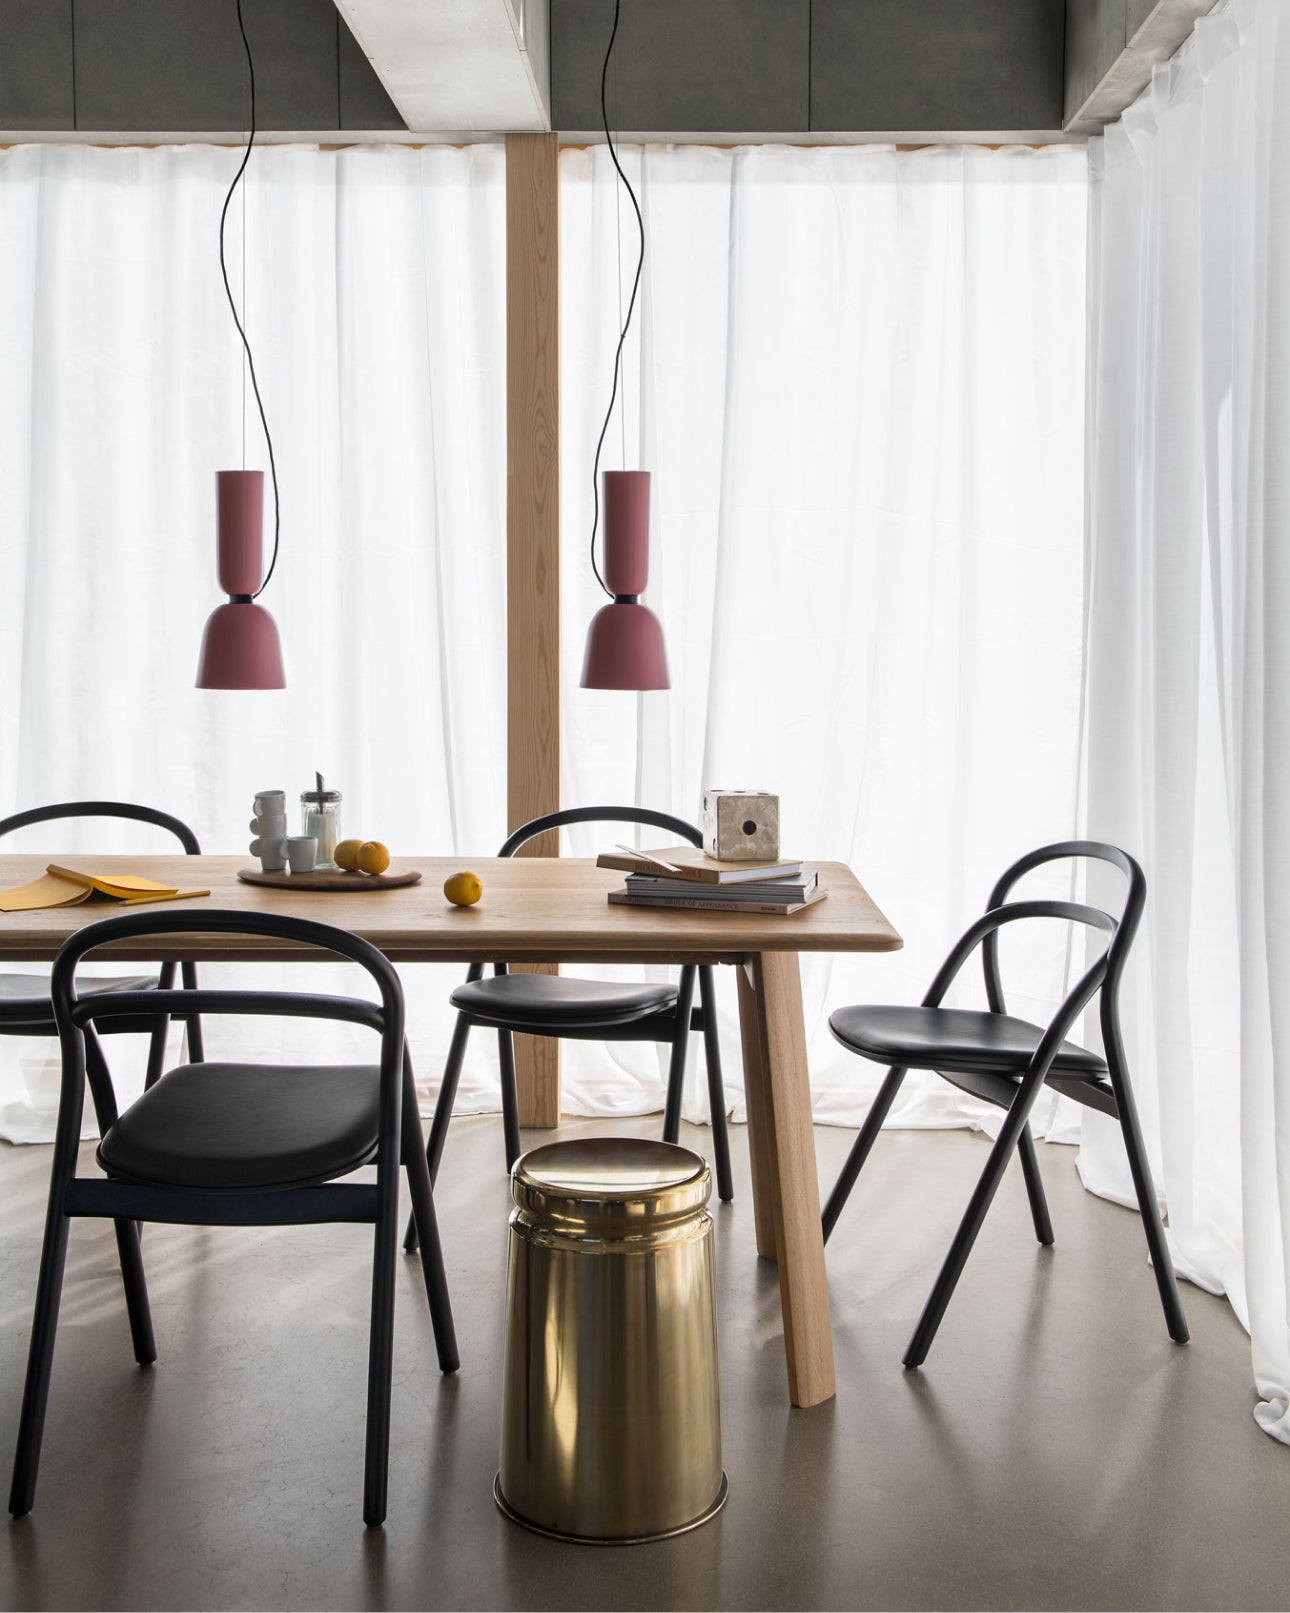 A dining room scene featuring two pink Alphabeta Pendant Lights over the table.